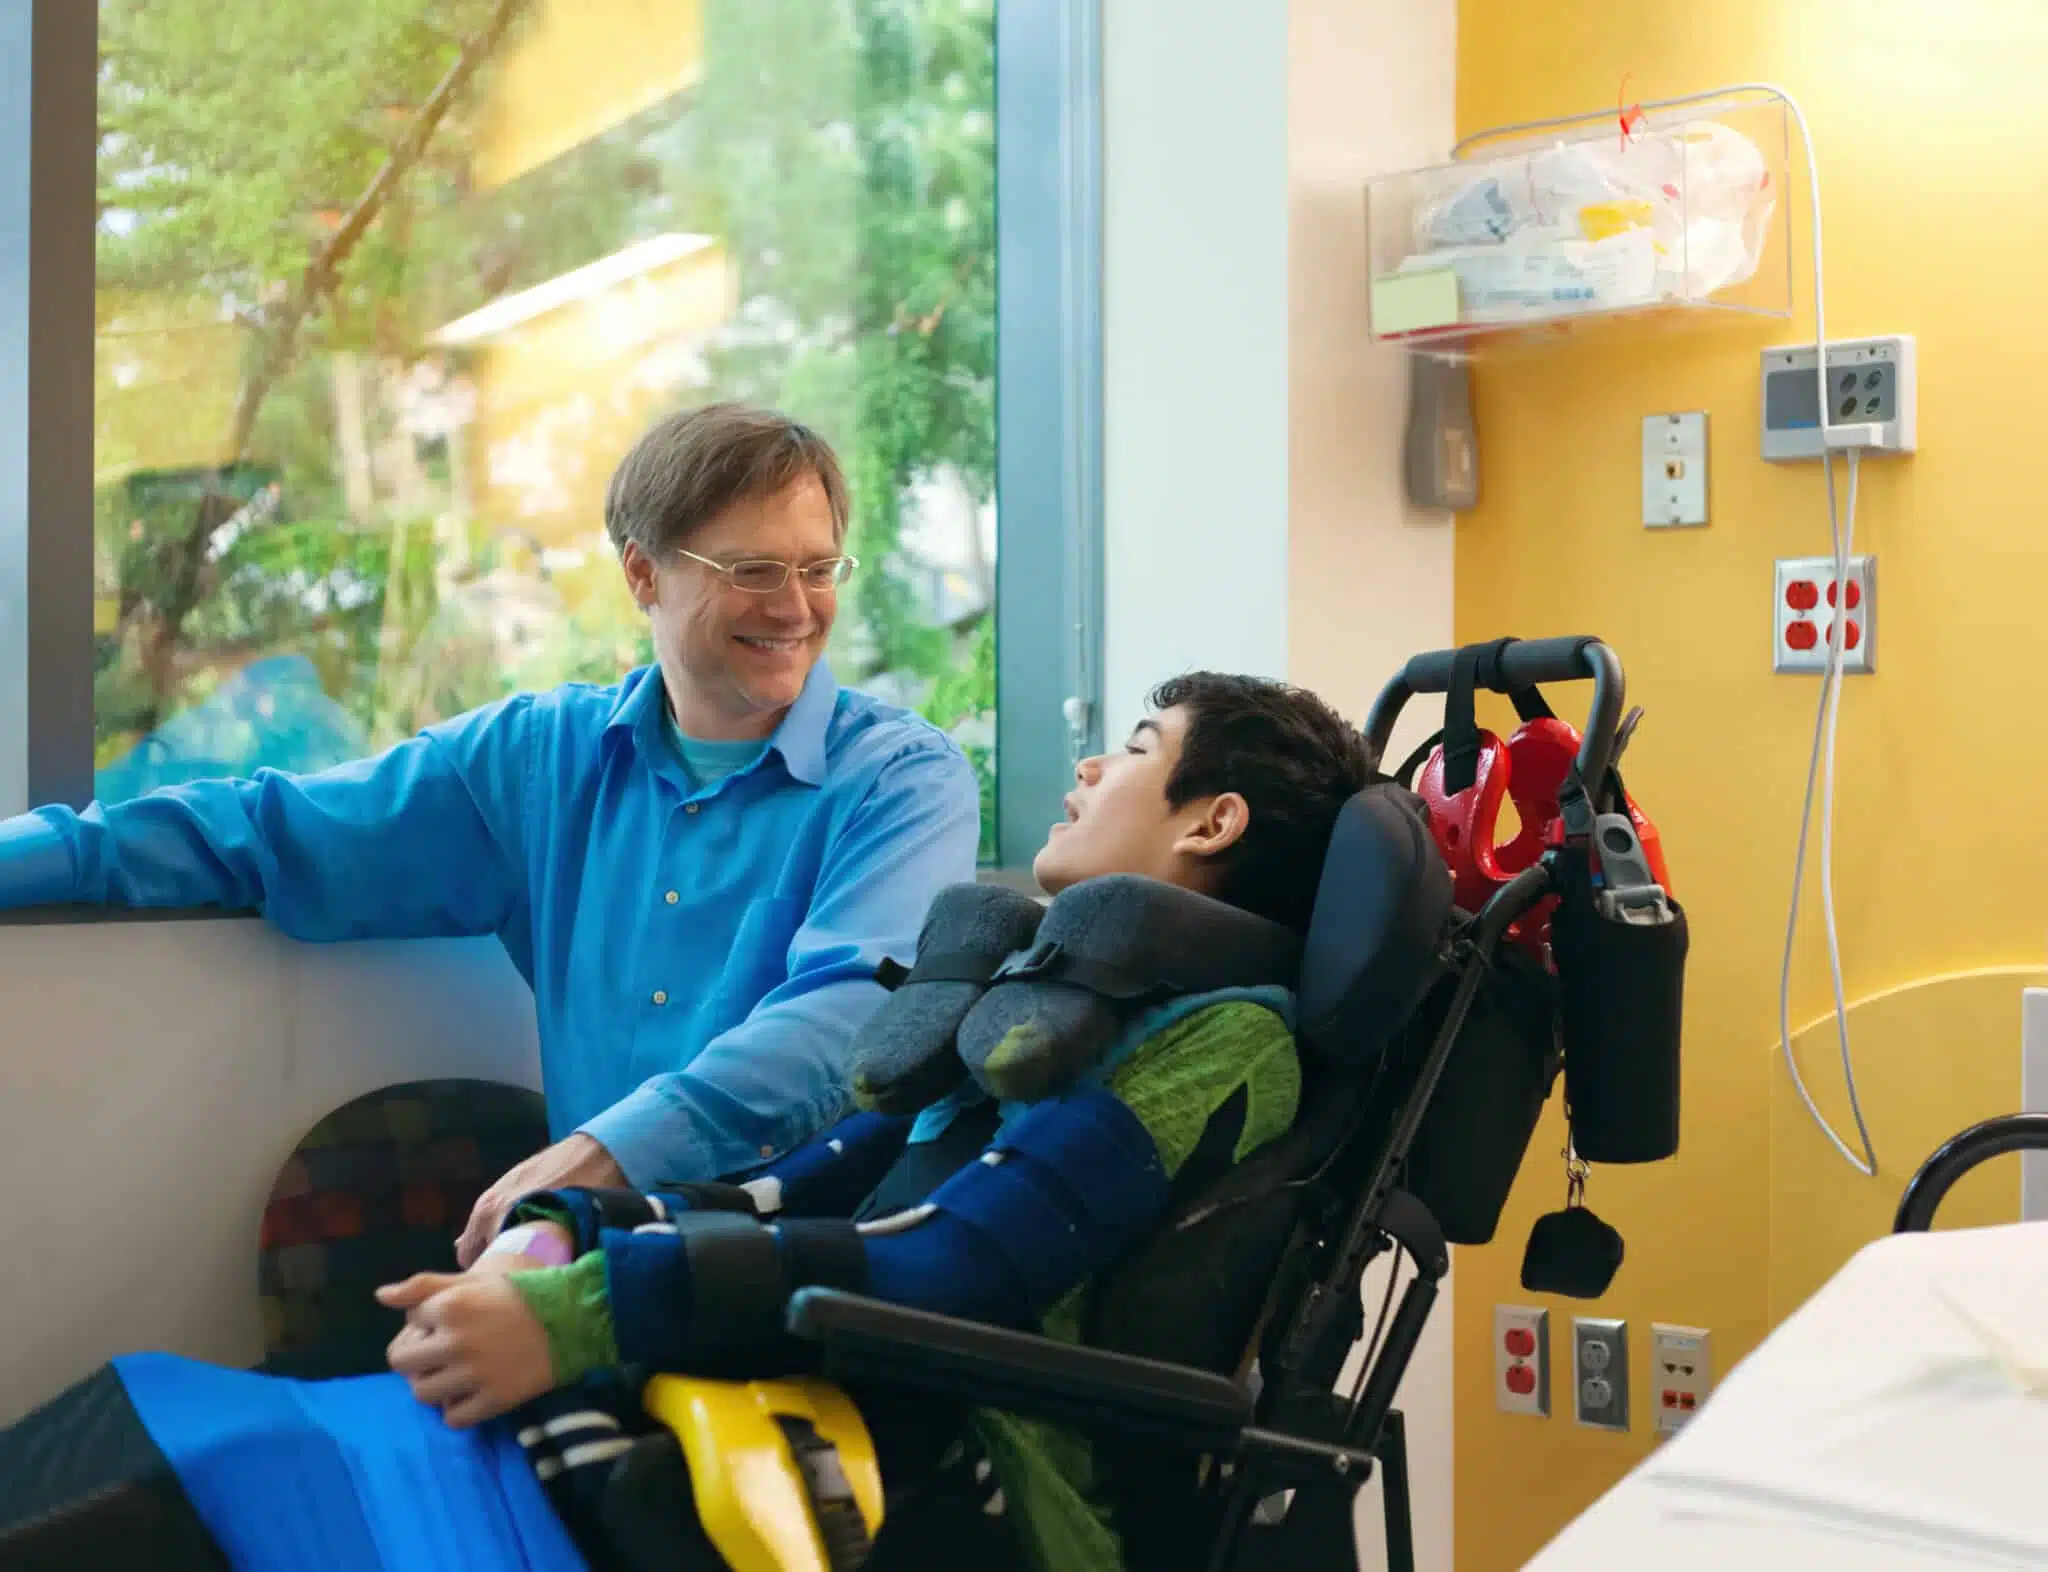 why euthanasia is wrong - Smiling father sitting next to disabled son in wheelchair by hospital bed, talking together